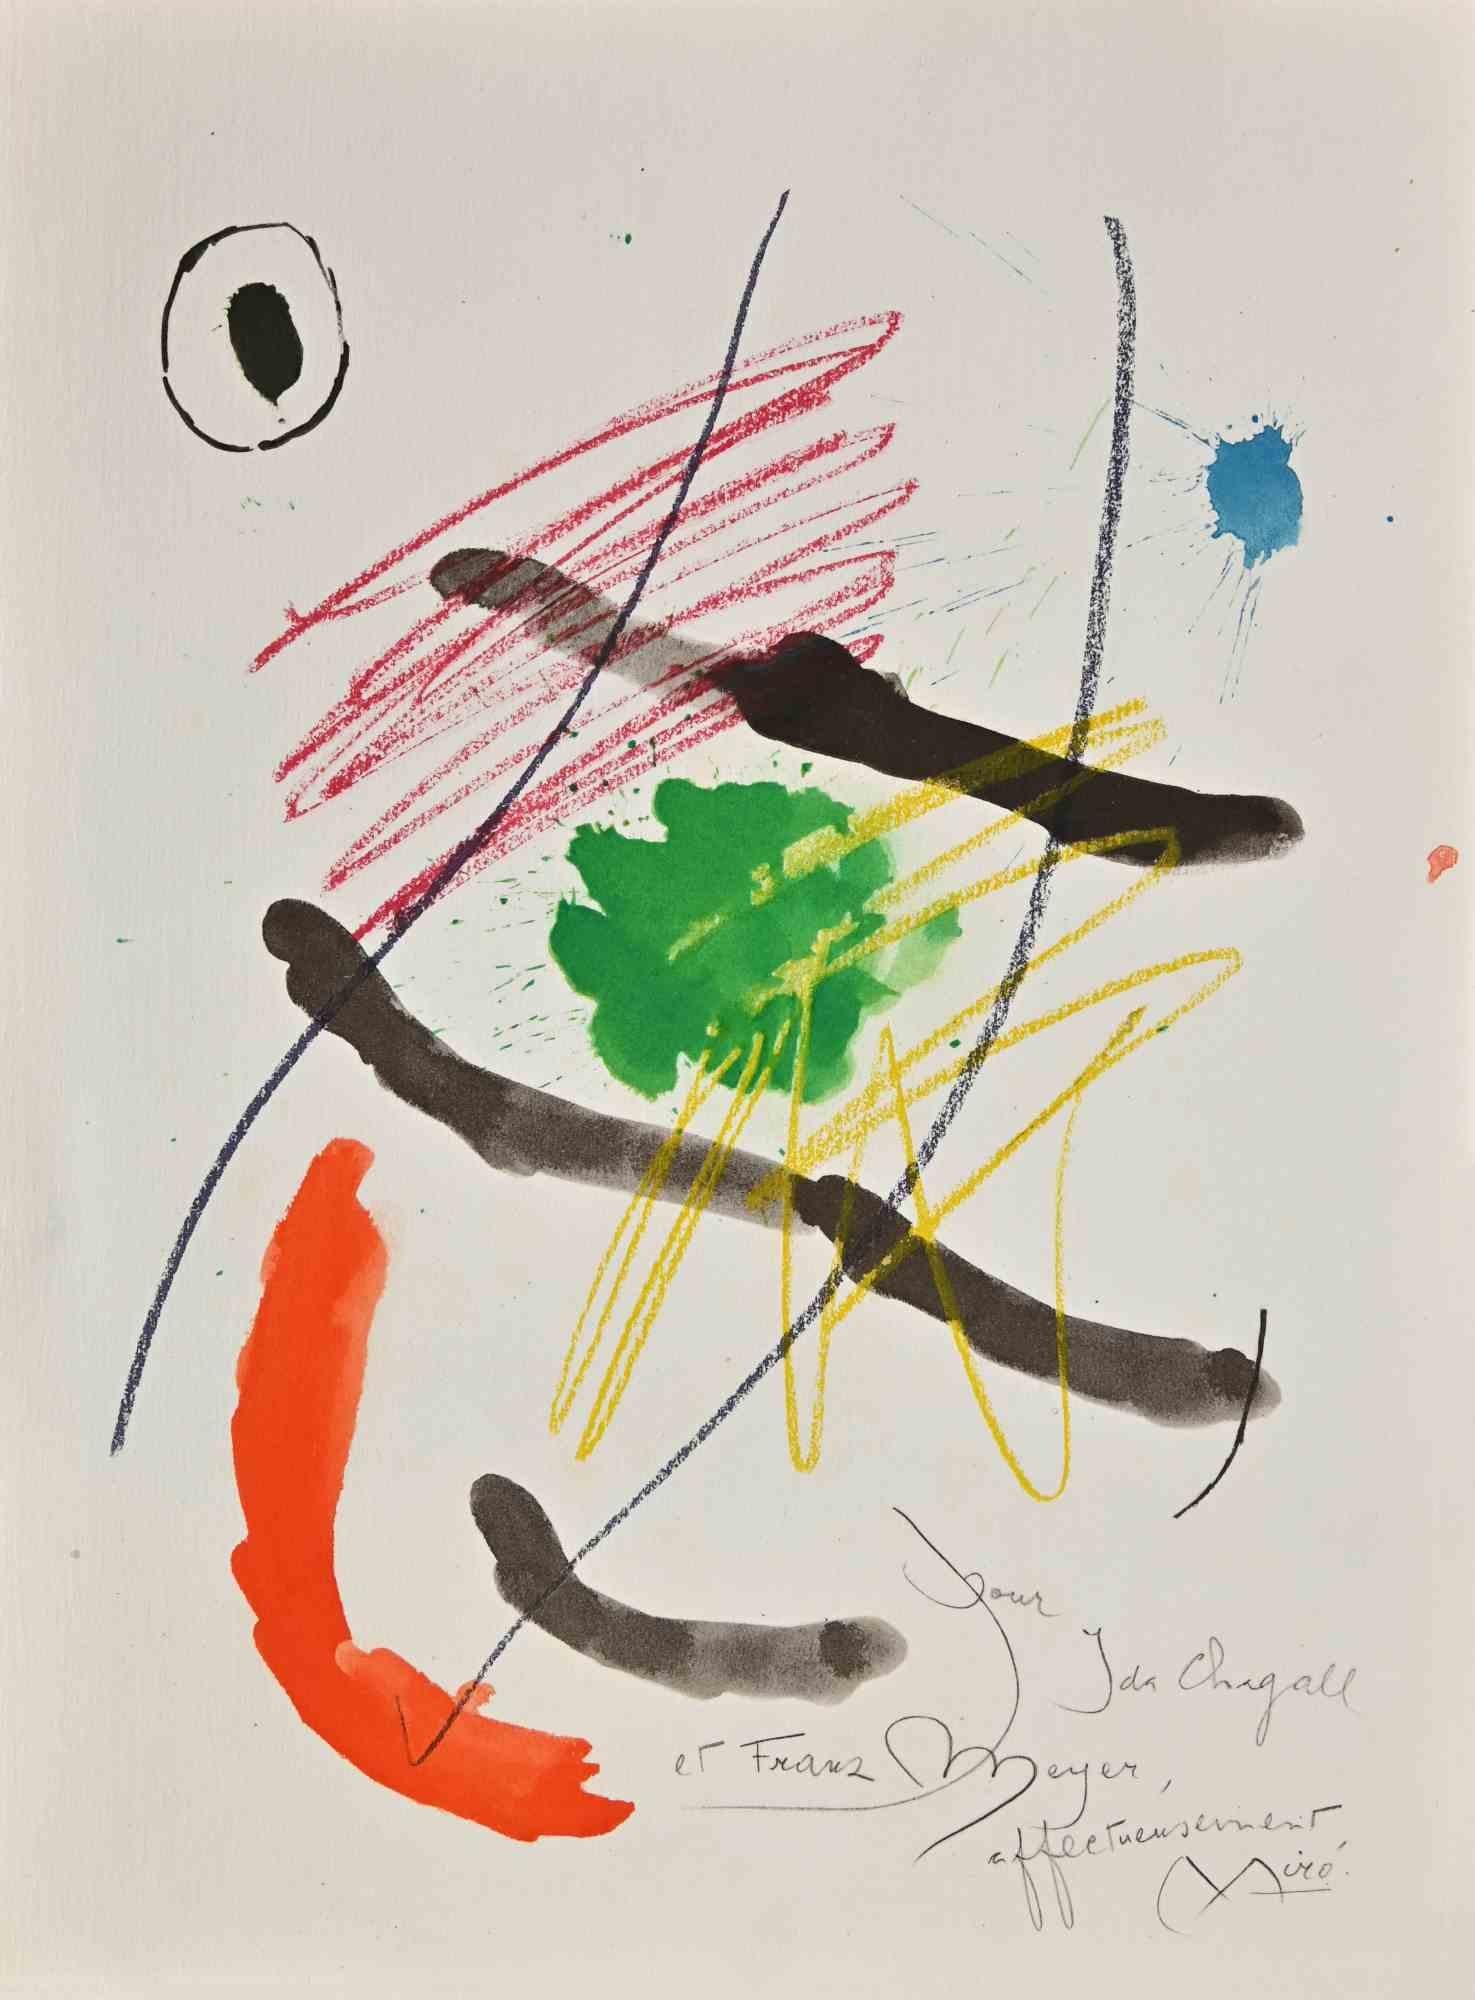 (after) Joan Miró Abstract Print - Pour Ida Chagall et Franz Meyer - Lithograph by Joan Mirò - 1970s